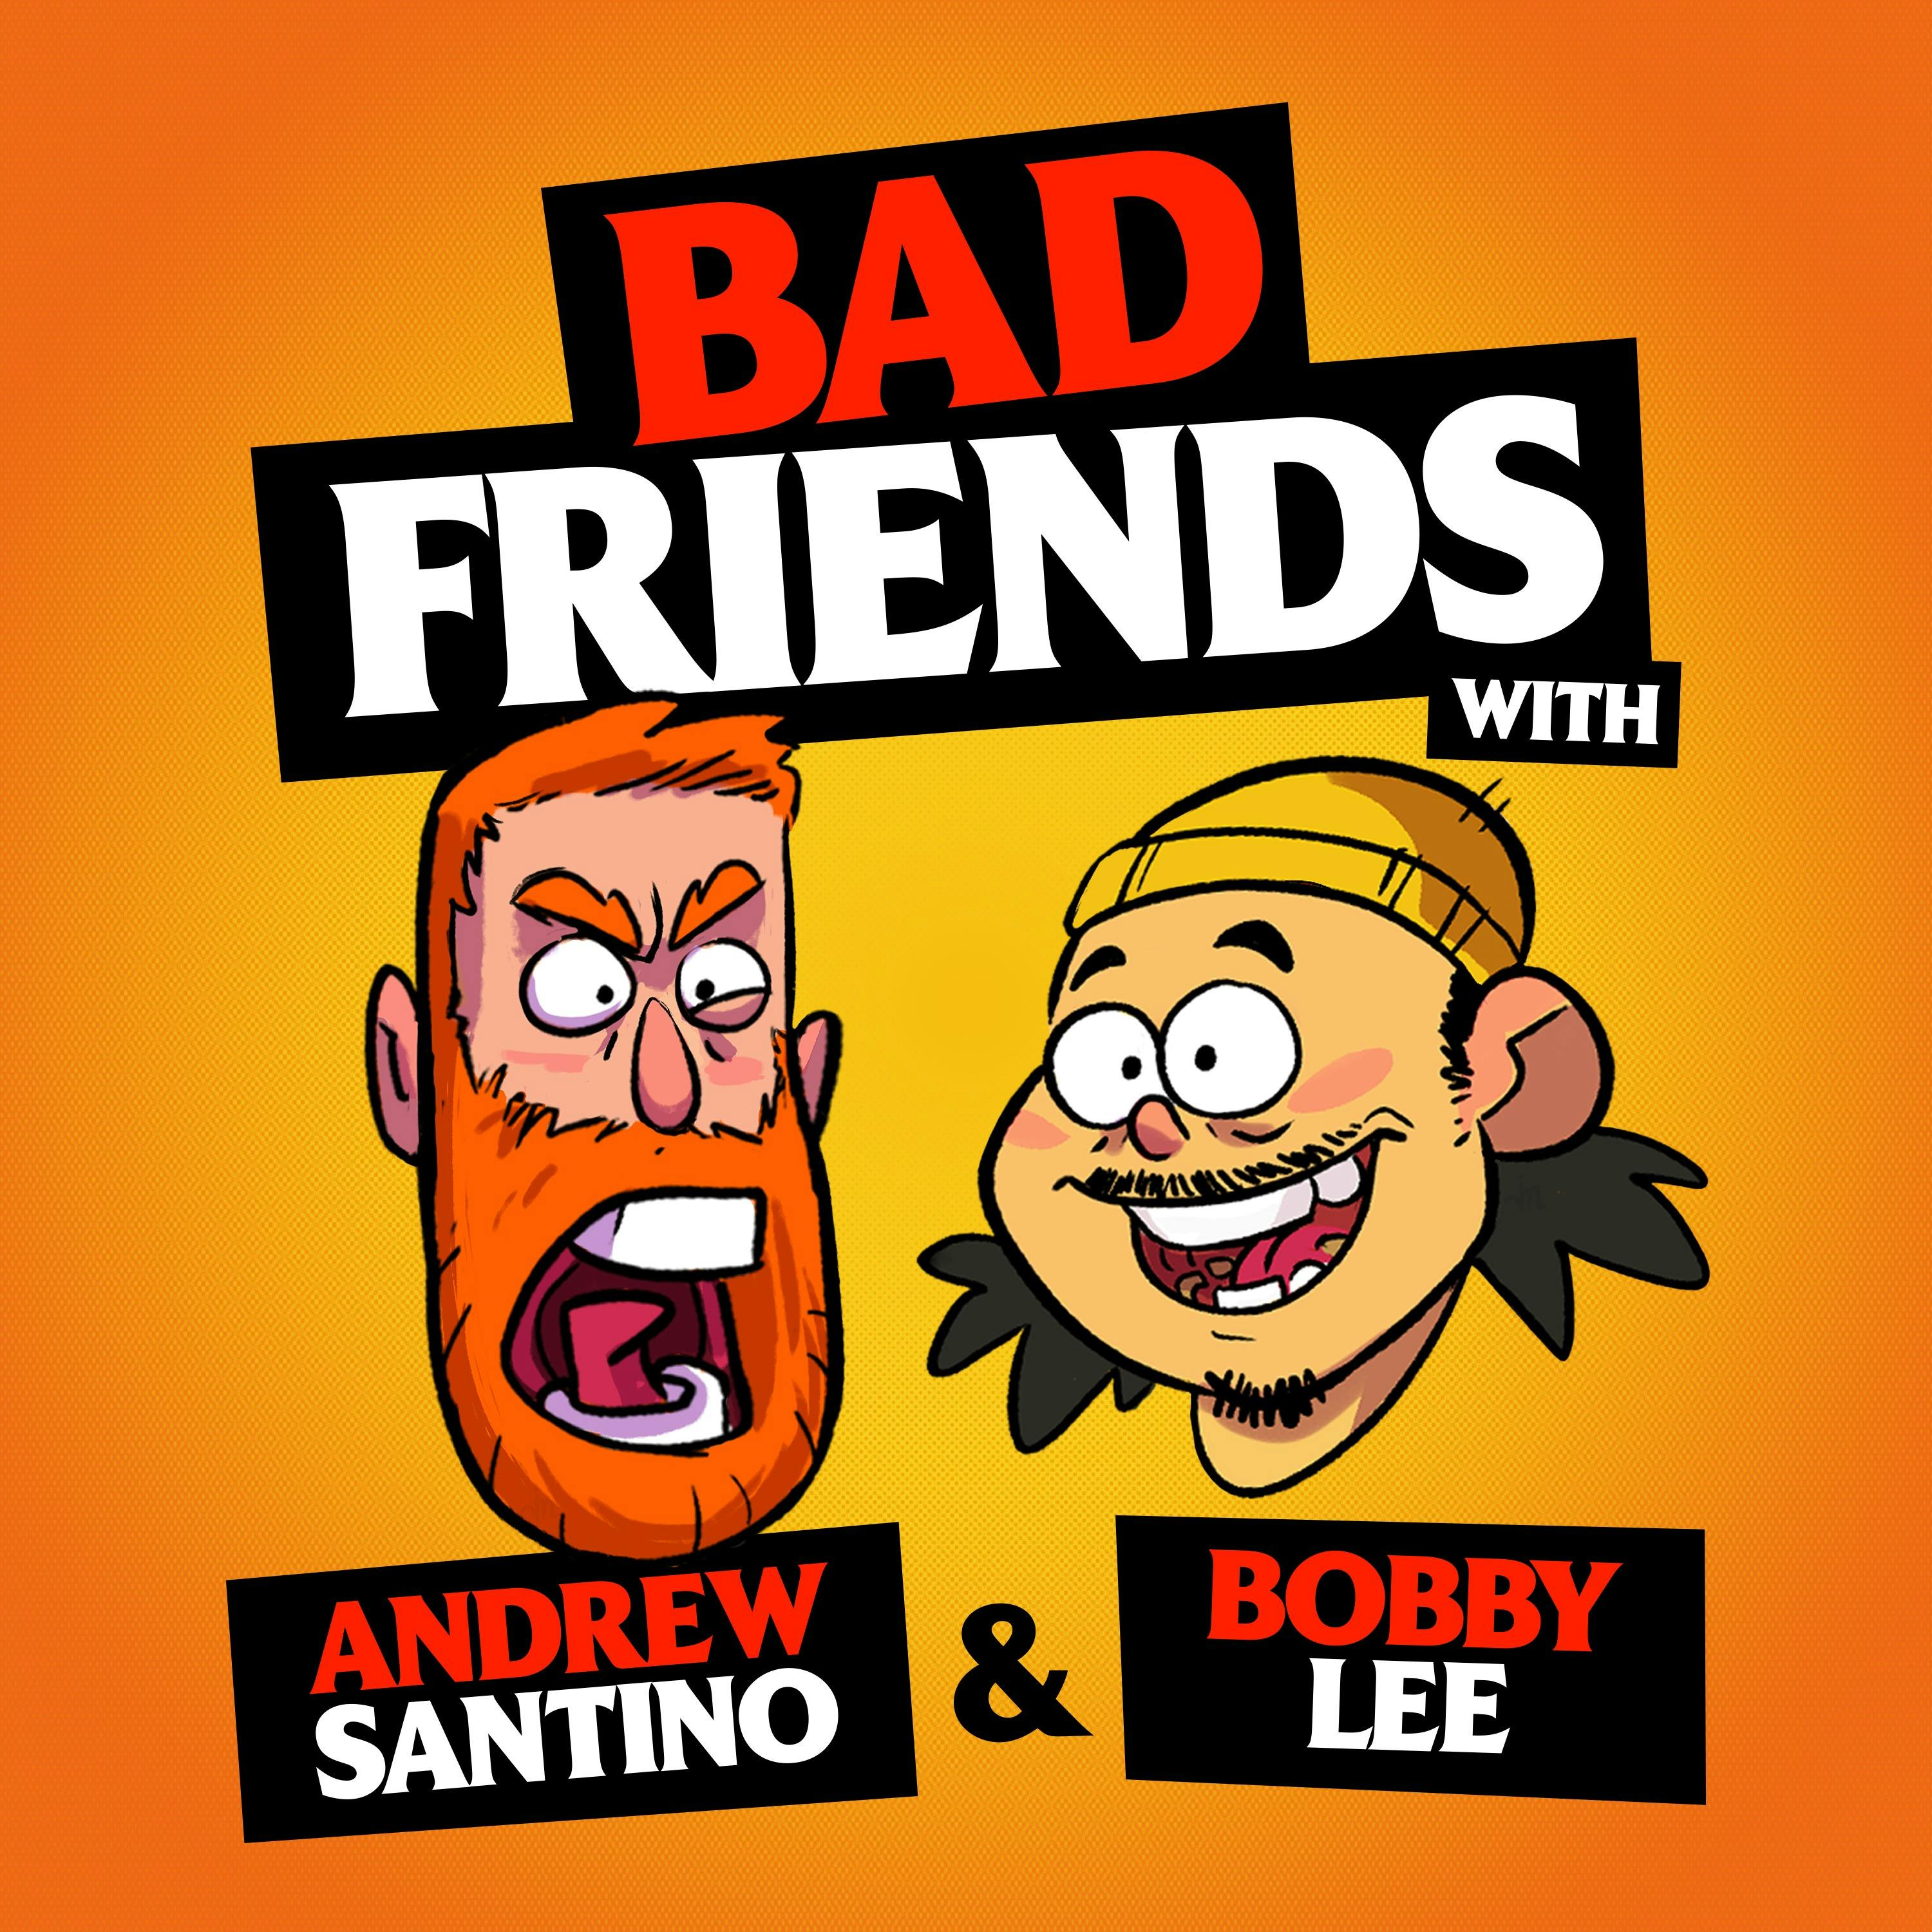 Fancy Is Back! by Andrew Santino and Bobby Lee